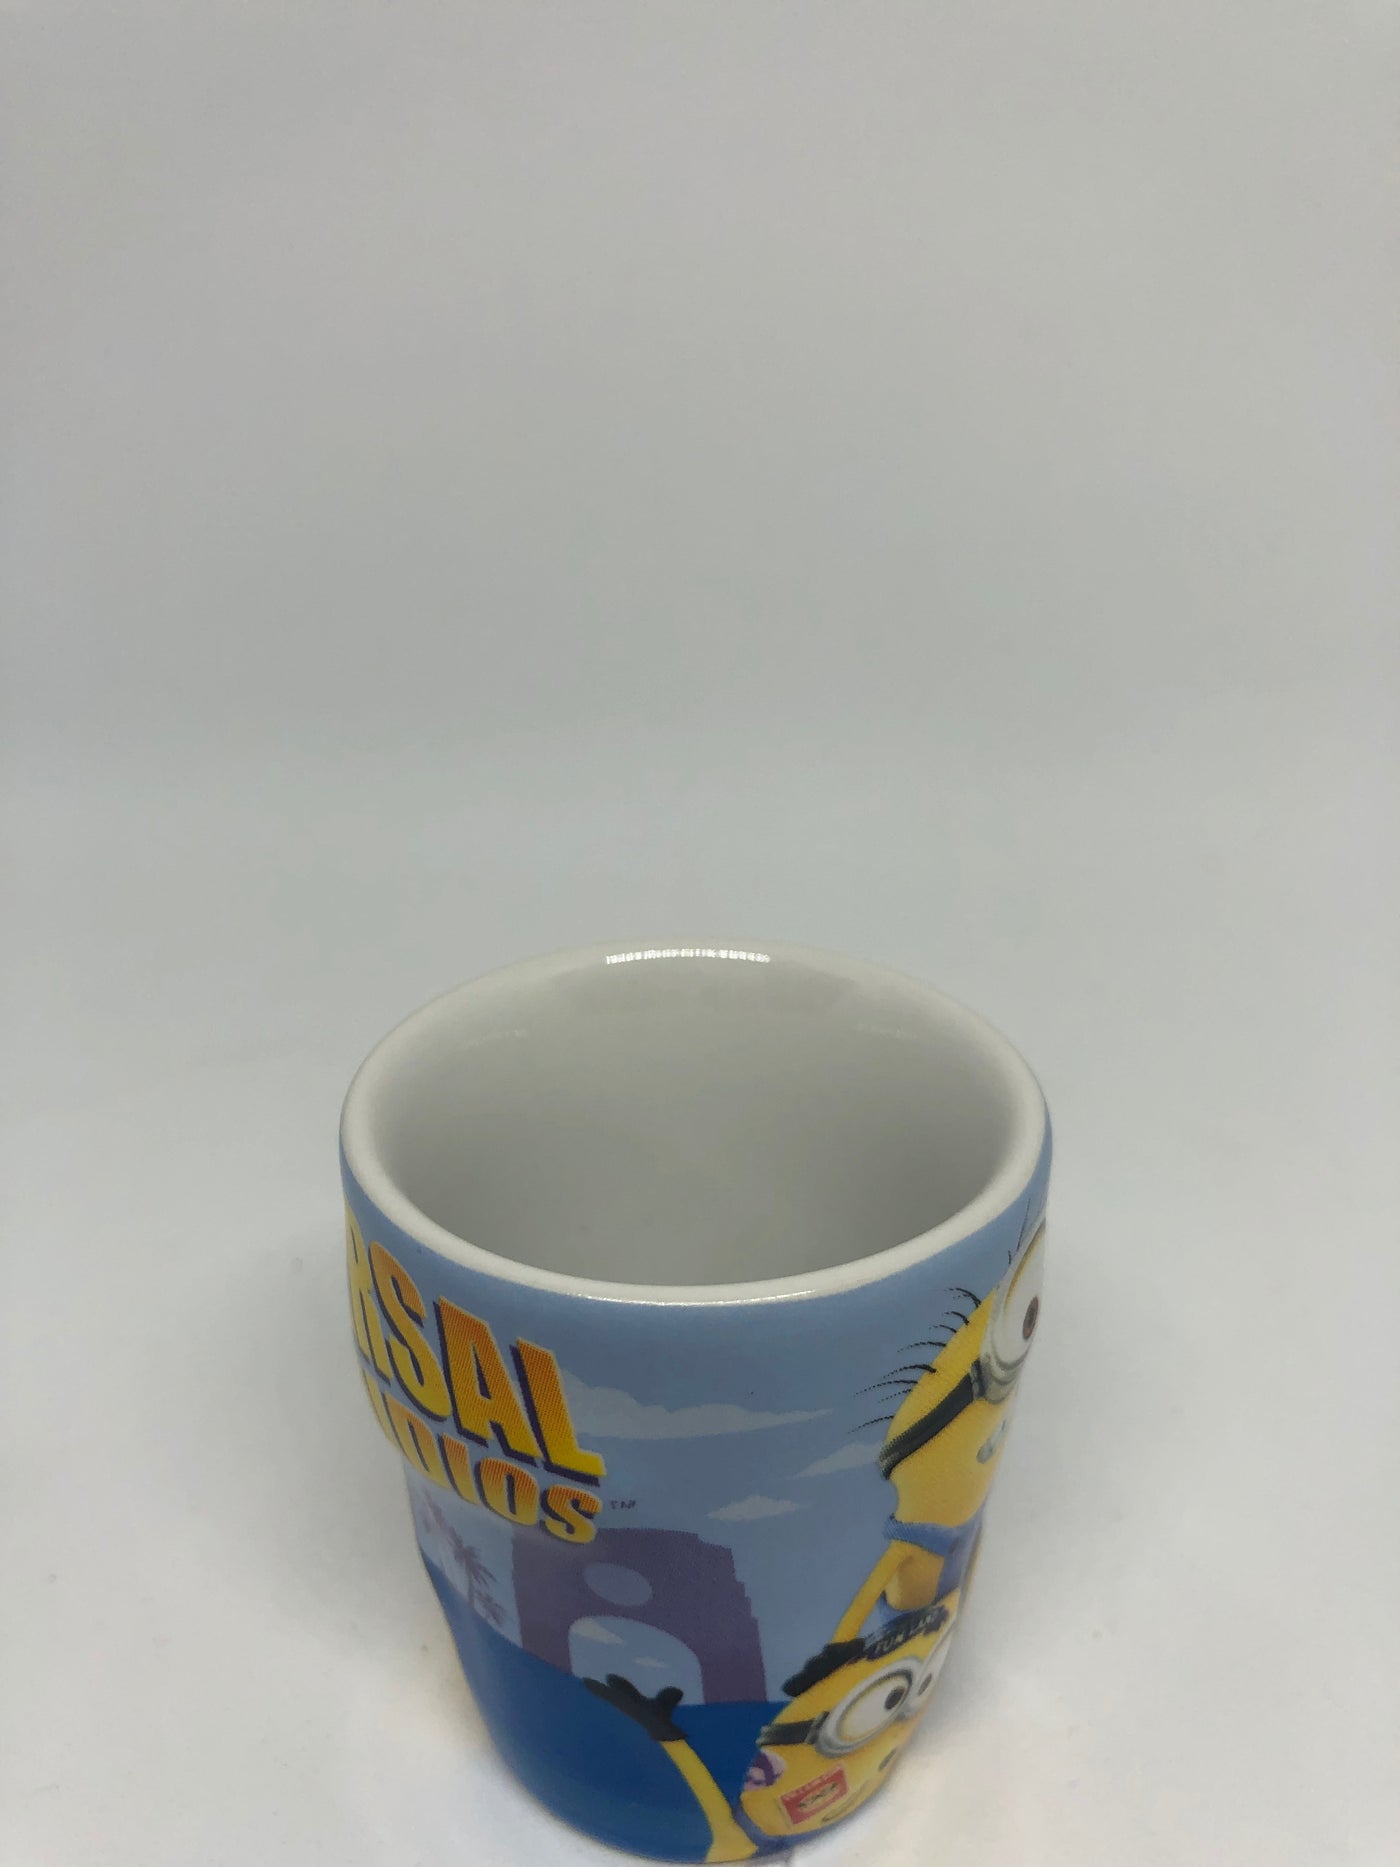 Universal Studios Orlando Despicable Me Approved Minion Mail Shot Glass New